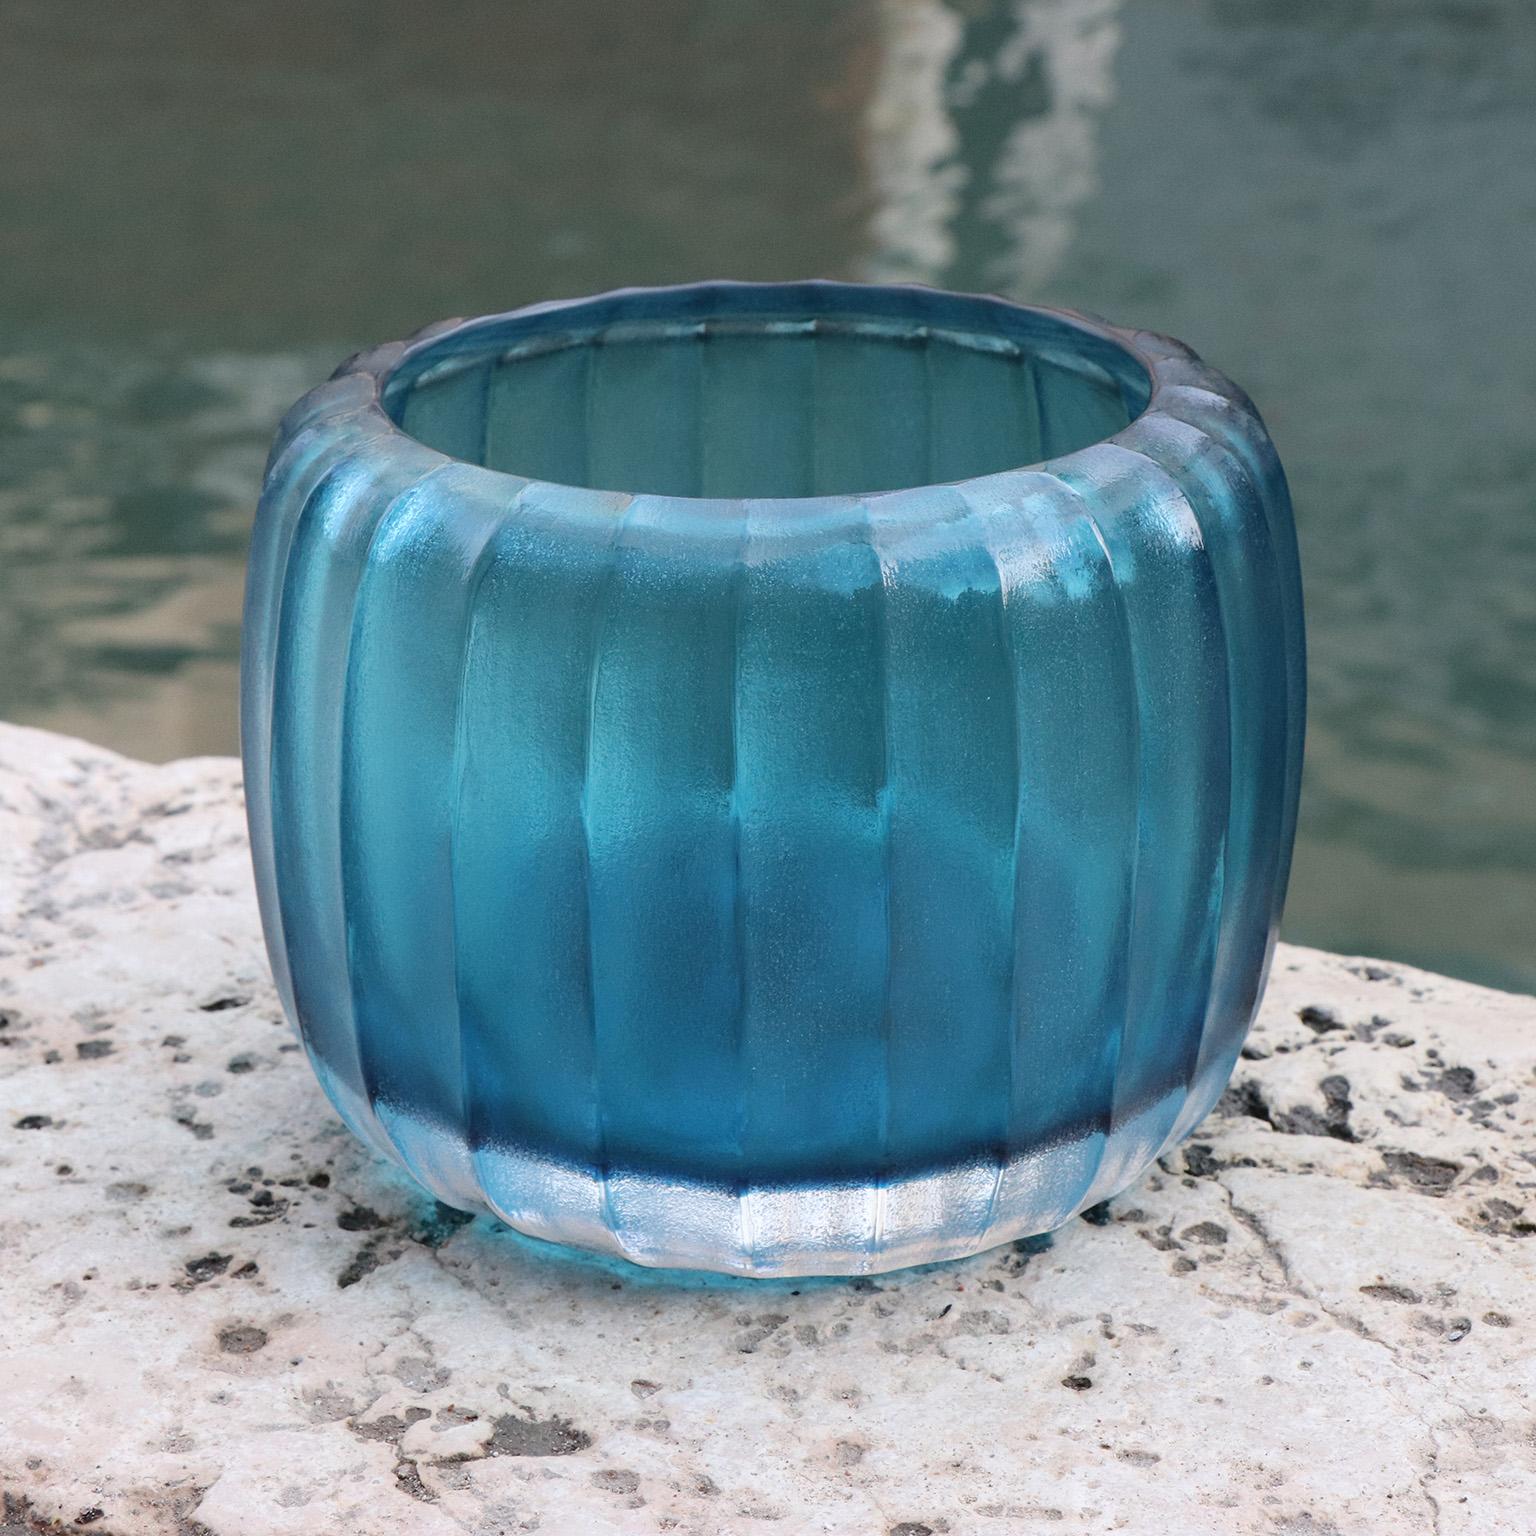 Defined by its sturdy, rotund body, the design of this vase recalls the Venetian water wells - Pozzo. Following the blowing process the vase is cold worked with carving and polishing techniques which completely transforms the visual and tactile